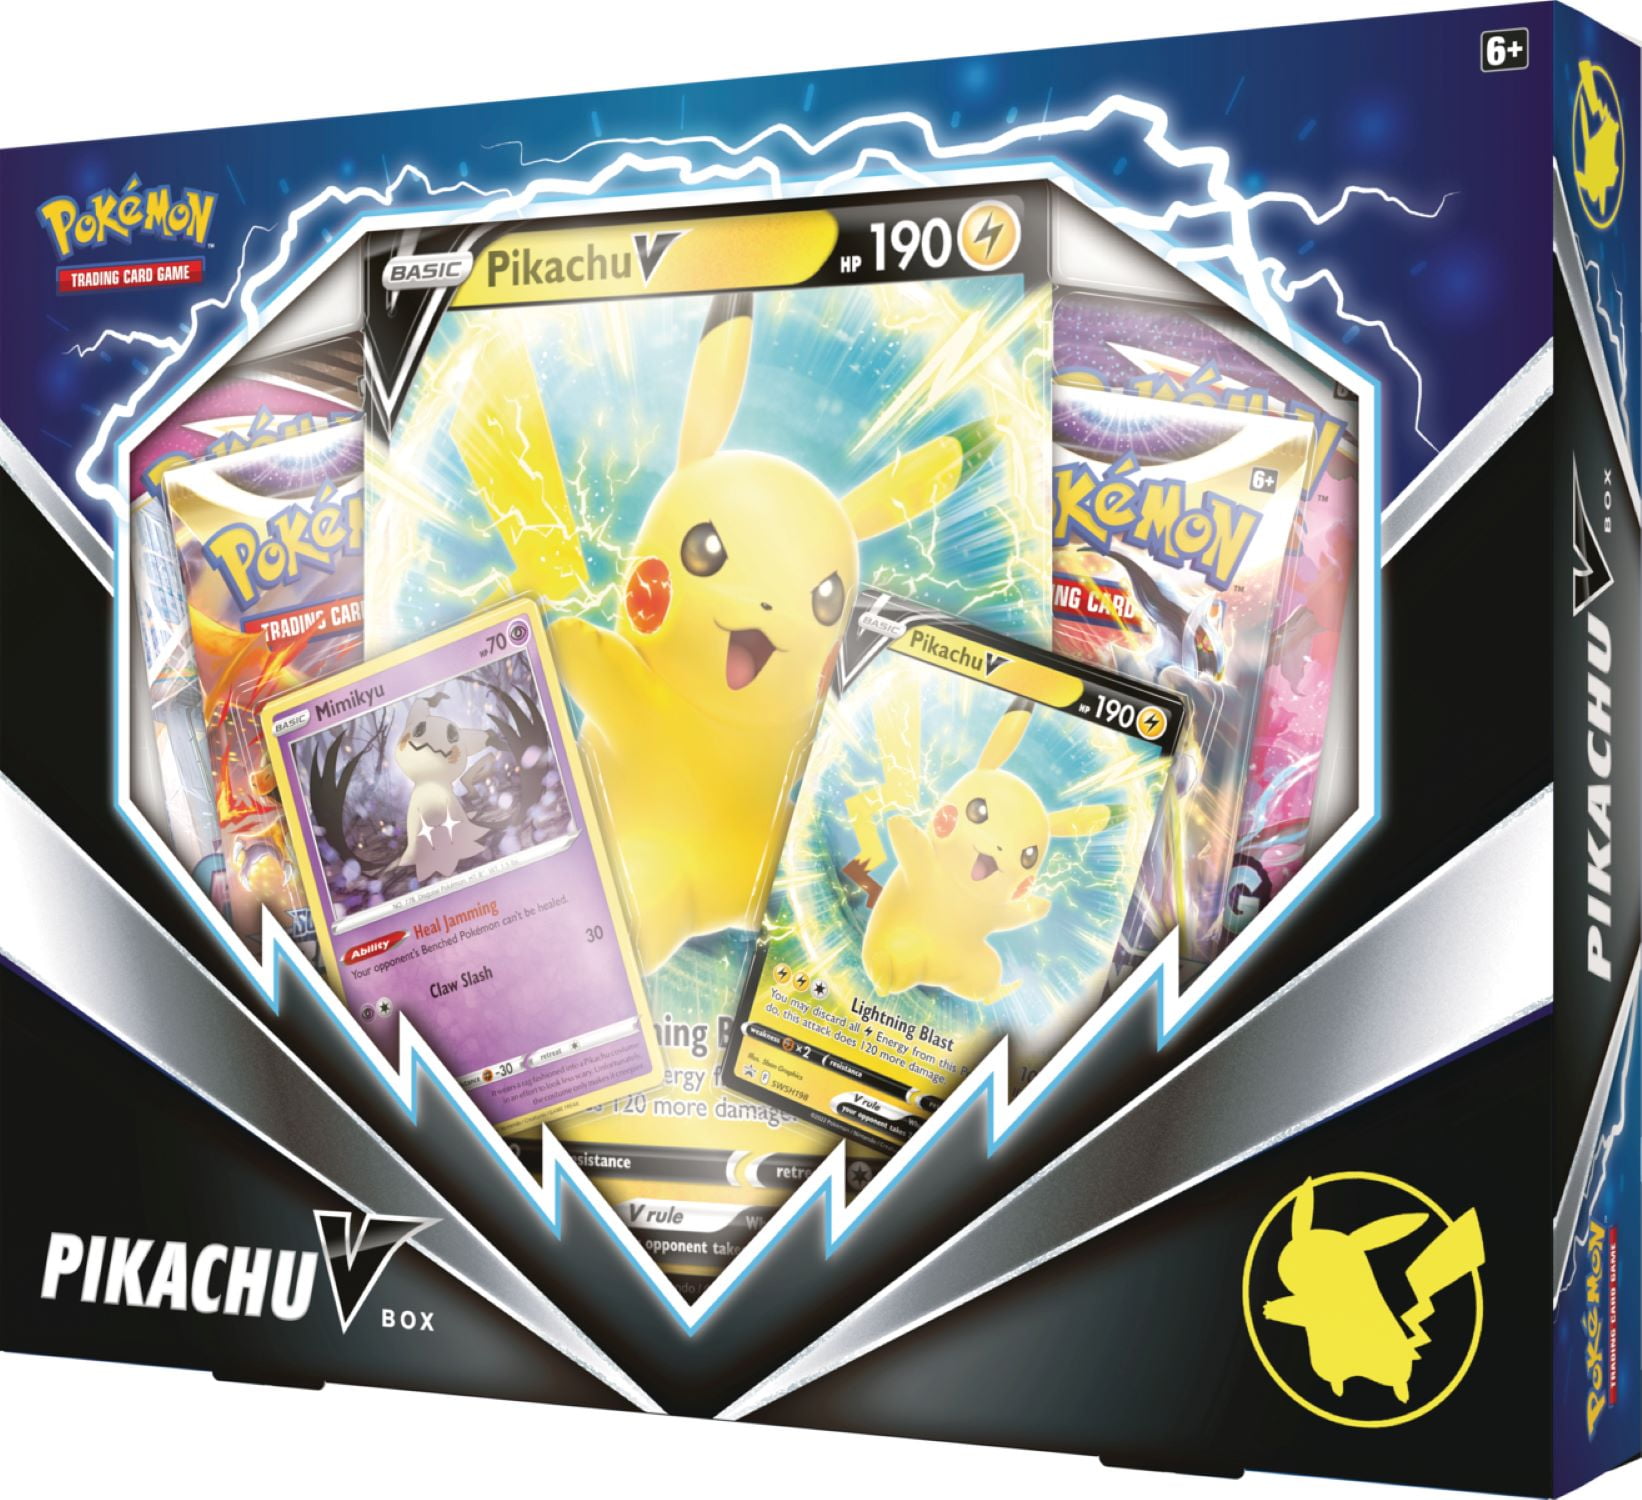 Details about   Pokemon TCG Shining Fates Pikachu V Box Collection Factory Sealed 4 Booster Pack 